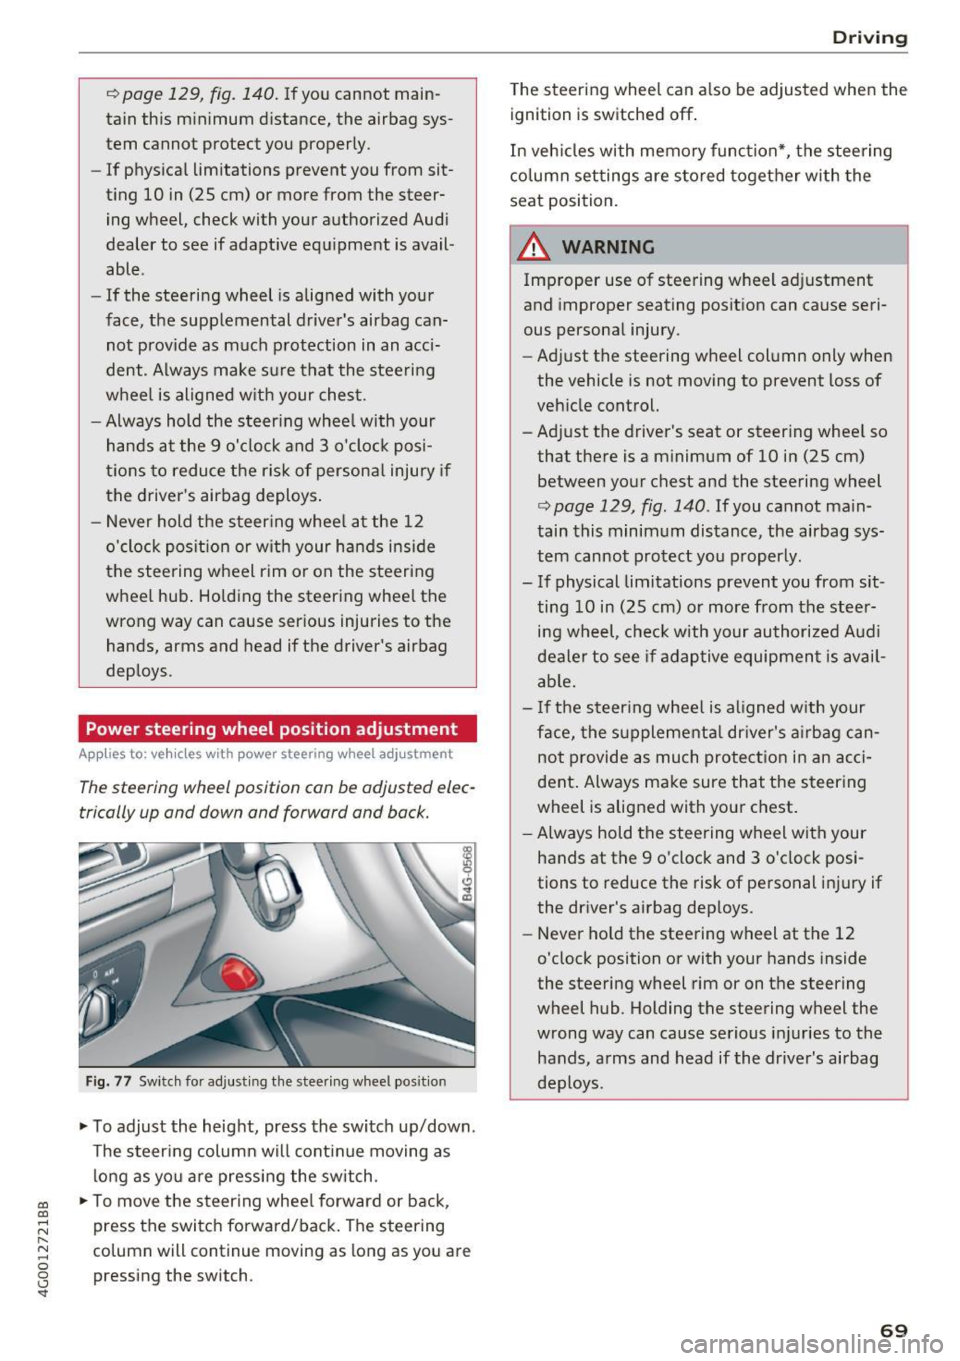 AUDI A6 2017  Owners Manual co 
co 
..., 
N 
" N ..., 
0 0 <.,;) SI 
~ page  129,  fig.  140. If  you  cannot  main­
tain  this  minimum  distance,  the  airbag  sys­
tem  cannot  protect  you  properly. 
- If physical  limi